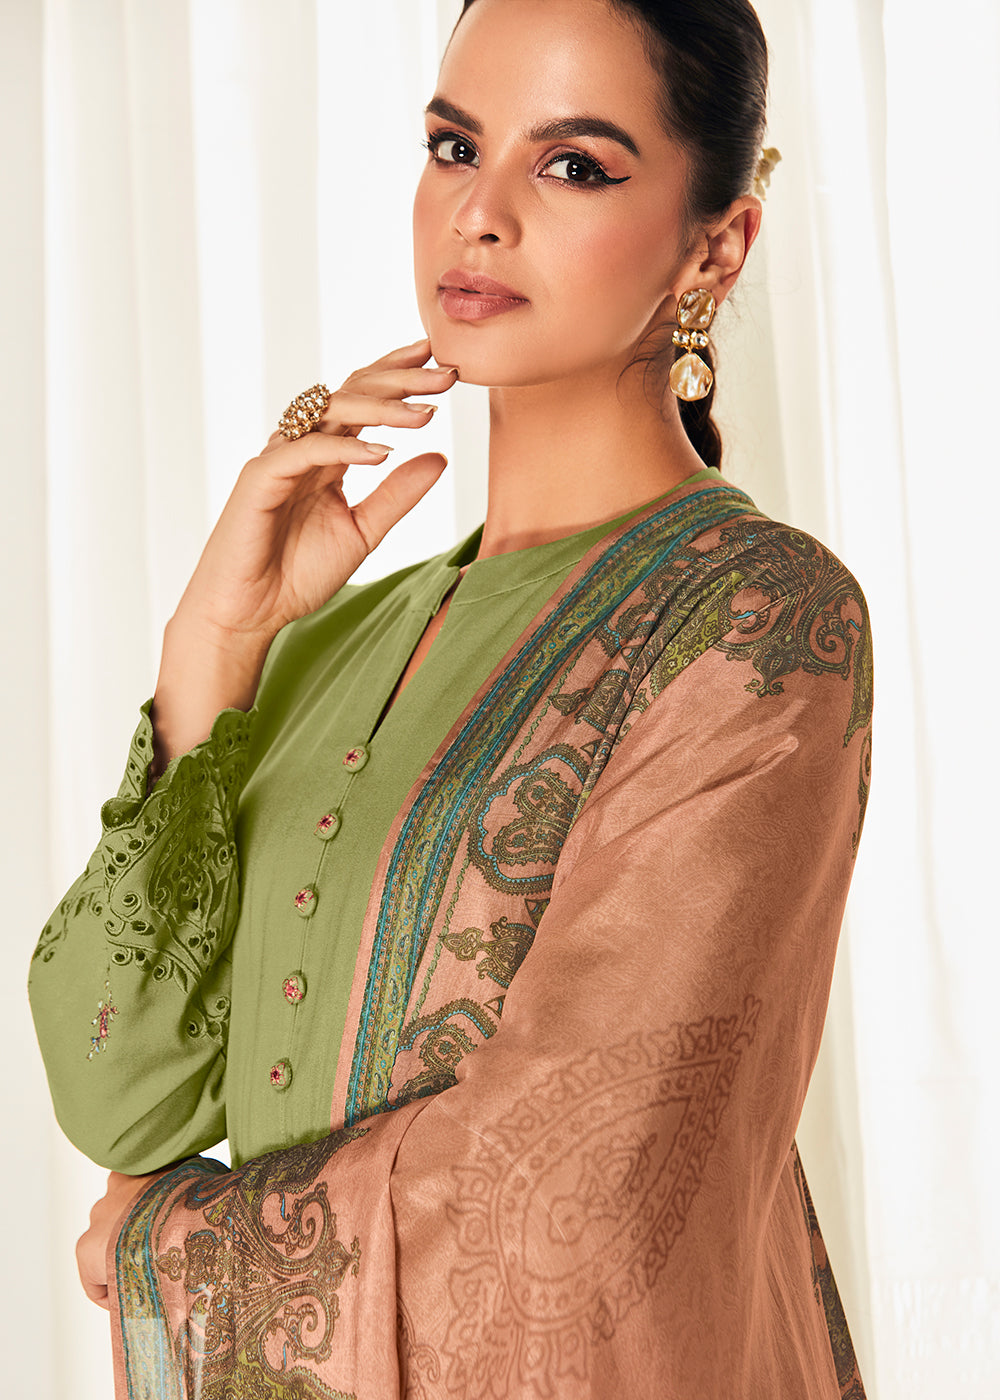 Buy Now Pleasing Green Suzani Inspired Embroidered Ethnic Salwar Suit Online in USA, UK, Canada, Germany, Australia & Worldwide at Empress Clothing.